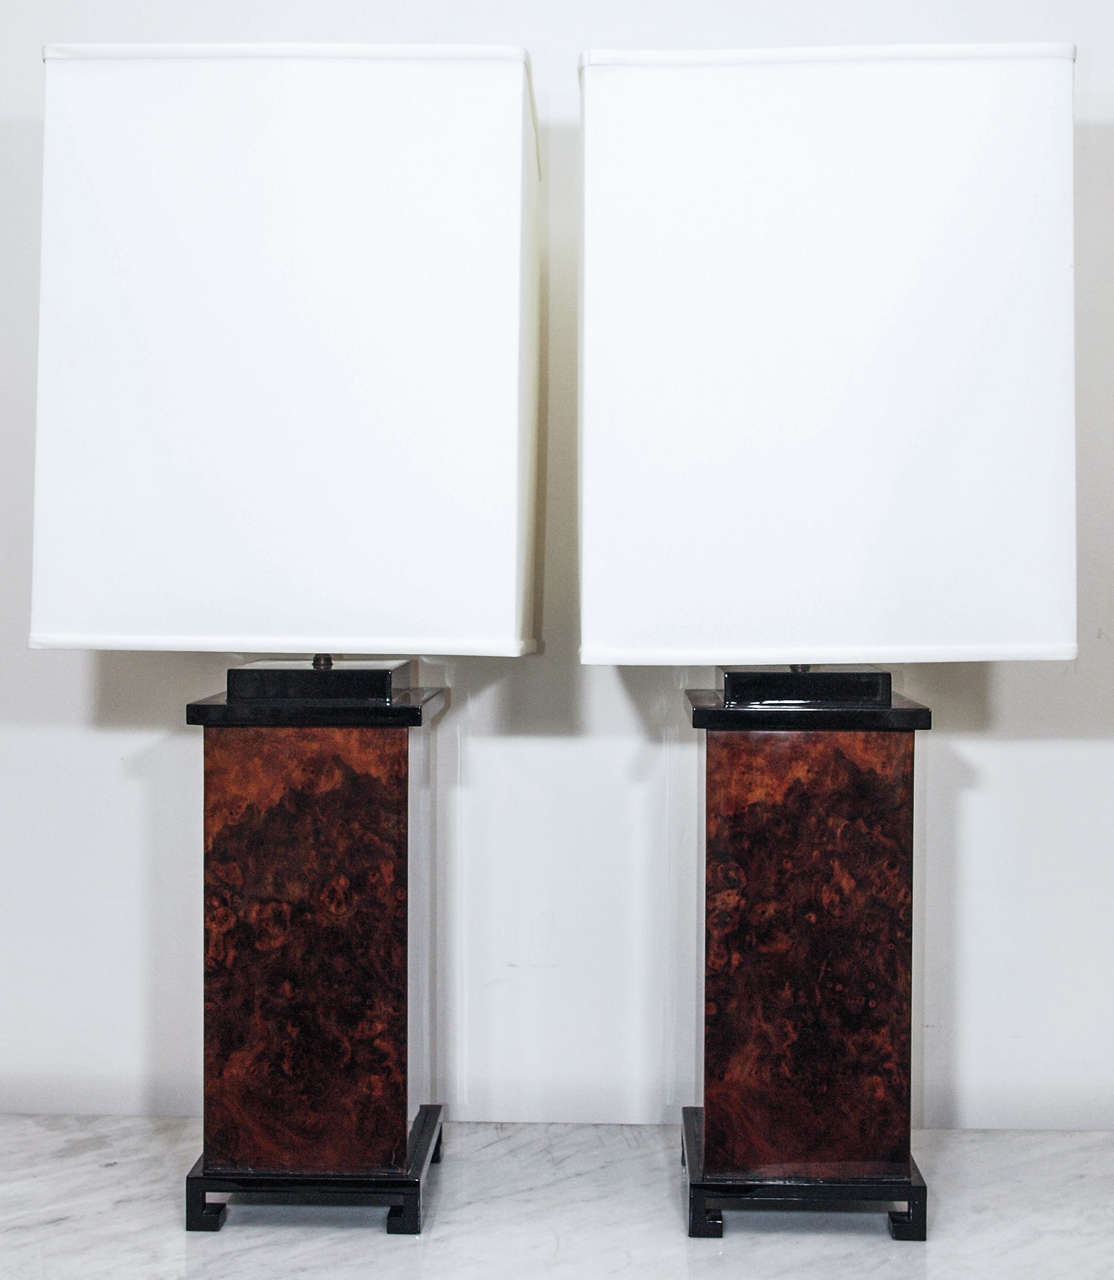 Two very large single-light table lamps with bodies in acrylic to simulate burled wood; bases and caps in black lacquer; base measures 8.25 x 8.25; shades in ivory hard-back linen; measurements include the shades